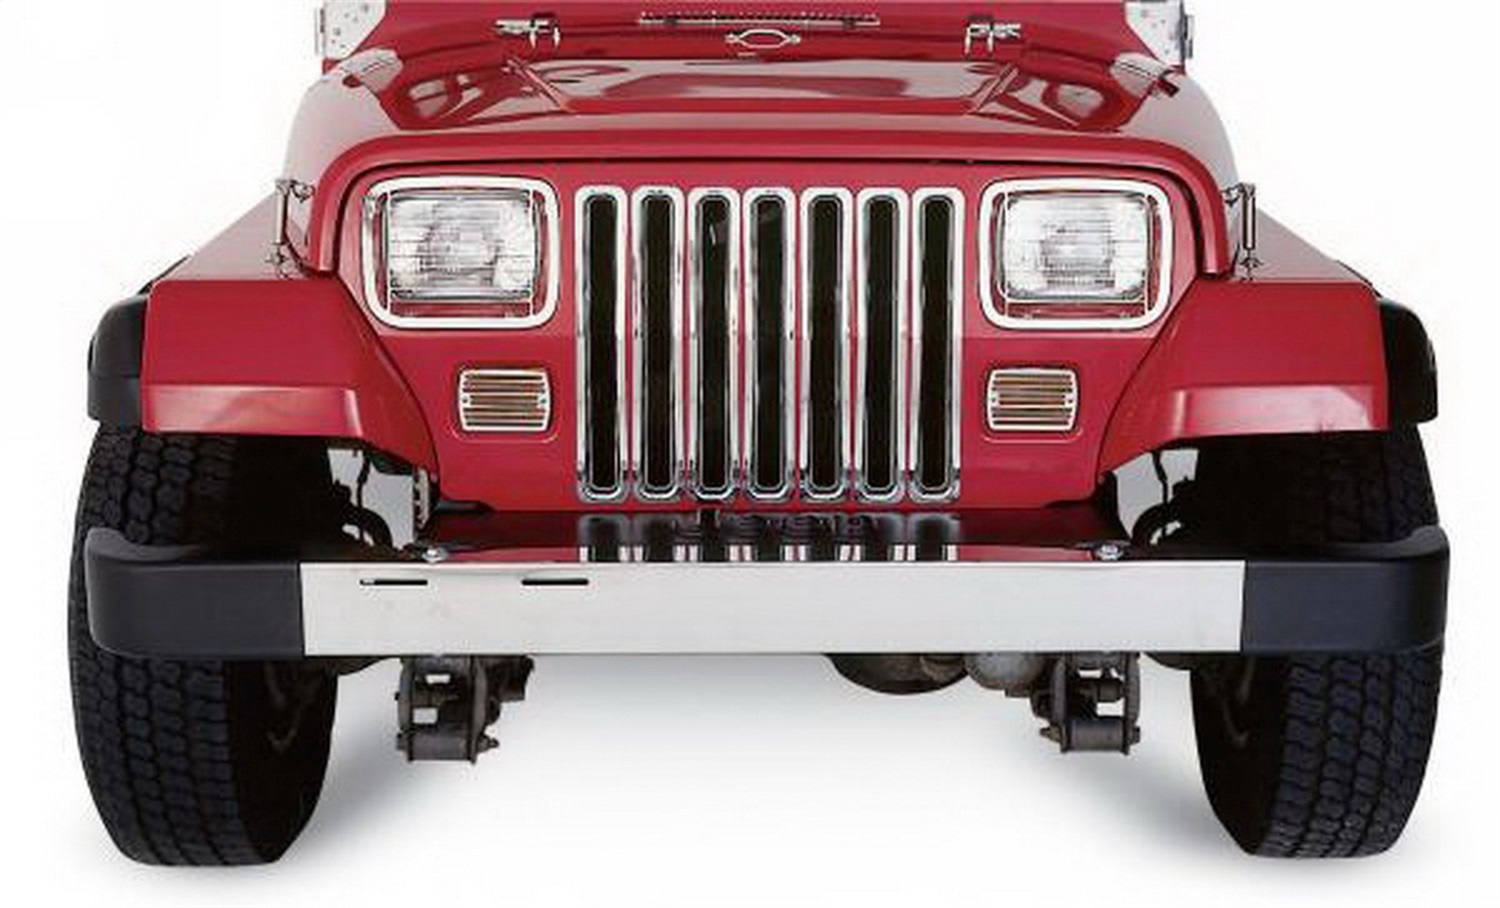 Rampage Grille Inserts | Steel, Chrome | 7509 | Fits 1987 - 95 Jeep Wrangler YJ